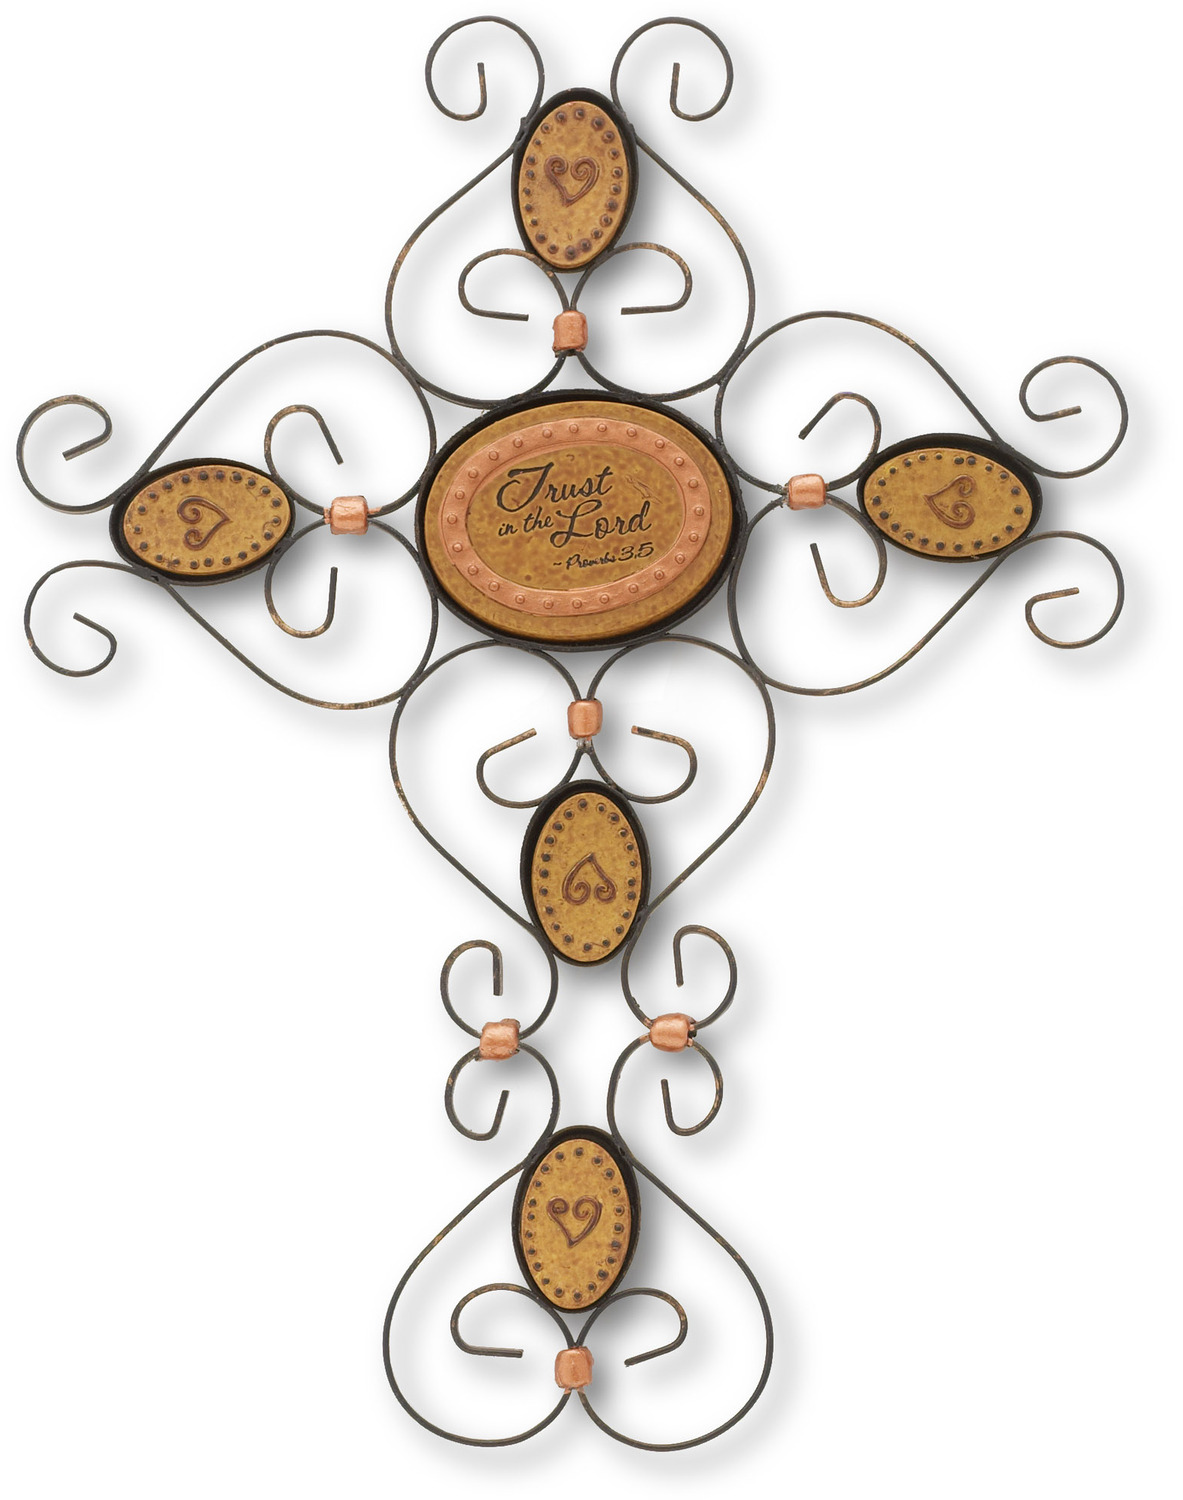 Trust in the Lord by Outdoor Comfort - Trust in the Lord - 9" Wall Hanging Cross